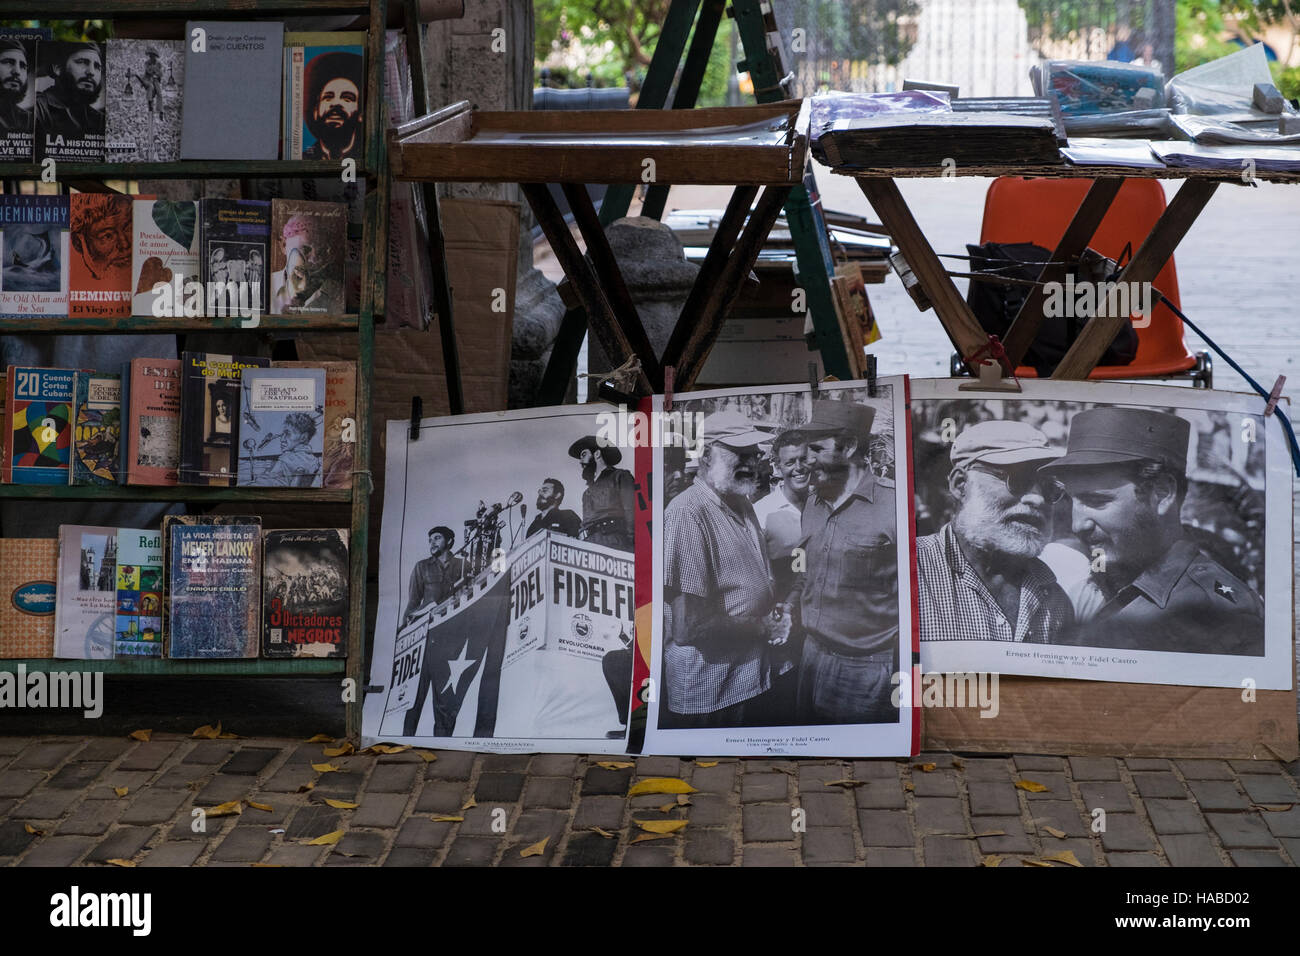 La Havana, Cuba, 26 November 2016. Scenes around the old town of La Havana on the day Castros death was announced. Old photos of Fidel Castro with Ernest Hemmingway at a stall in the Plaza Armas. Stock Photo